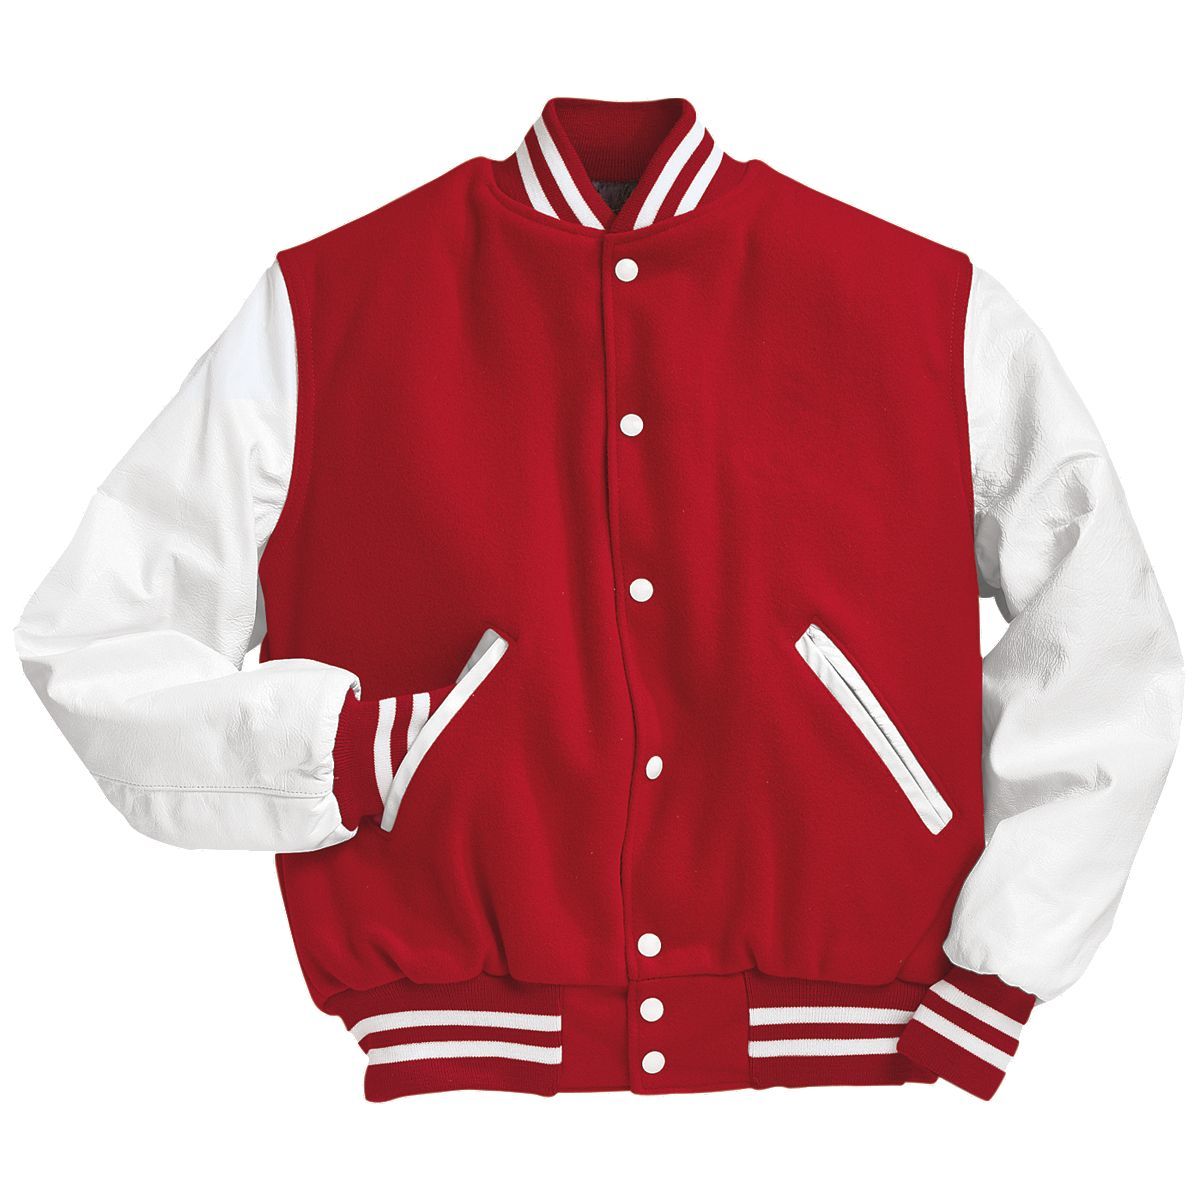 Holloway Varsity Tall Jacket in Scarlet/White  -Part of the Adult, Adult-Jacket, Holloway, Outerwear product lines at KanaleyCreations.com